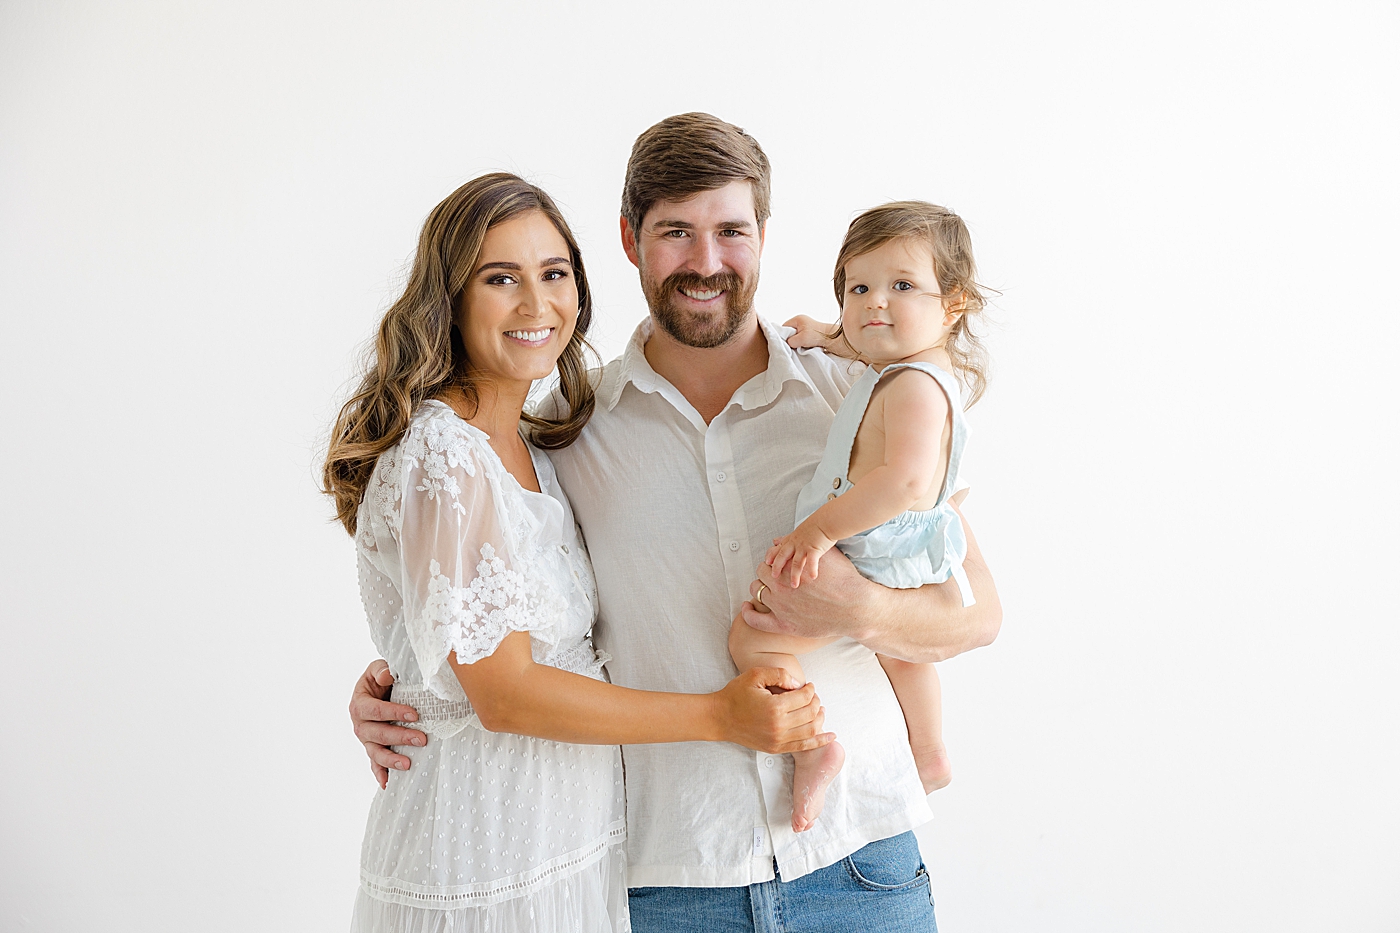 Mom and dad with their toddler during their Studio Family Session | Photo by Sana Ahmed Photography